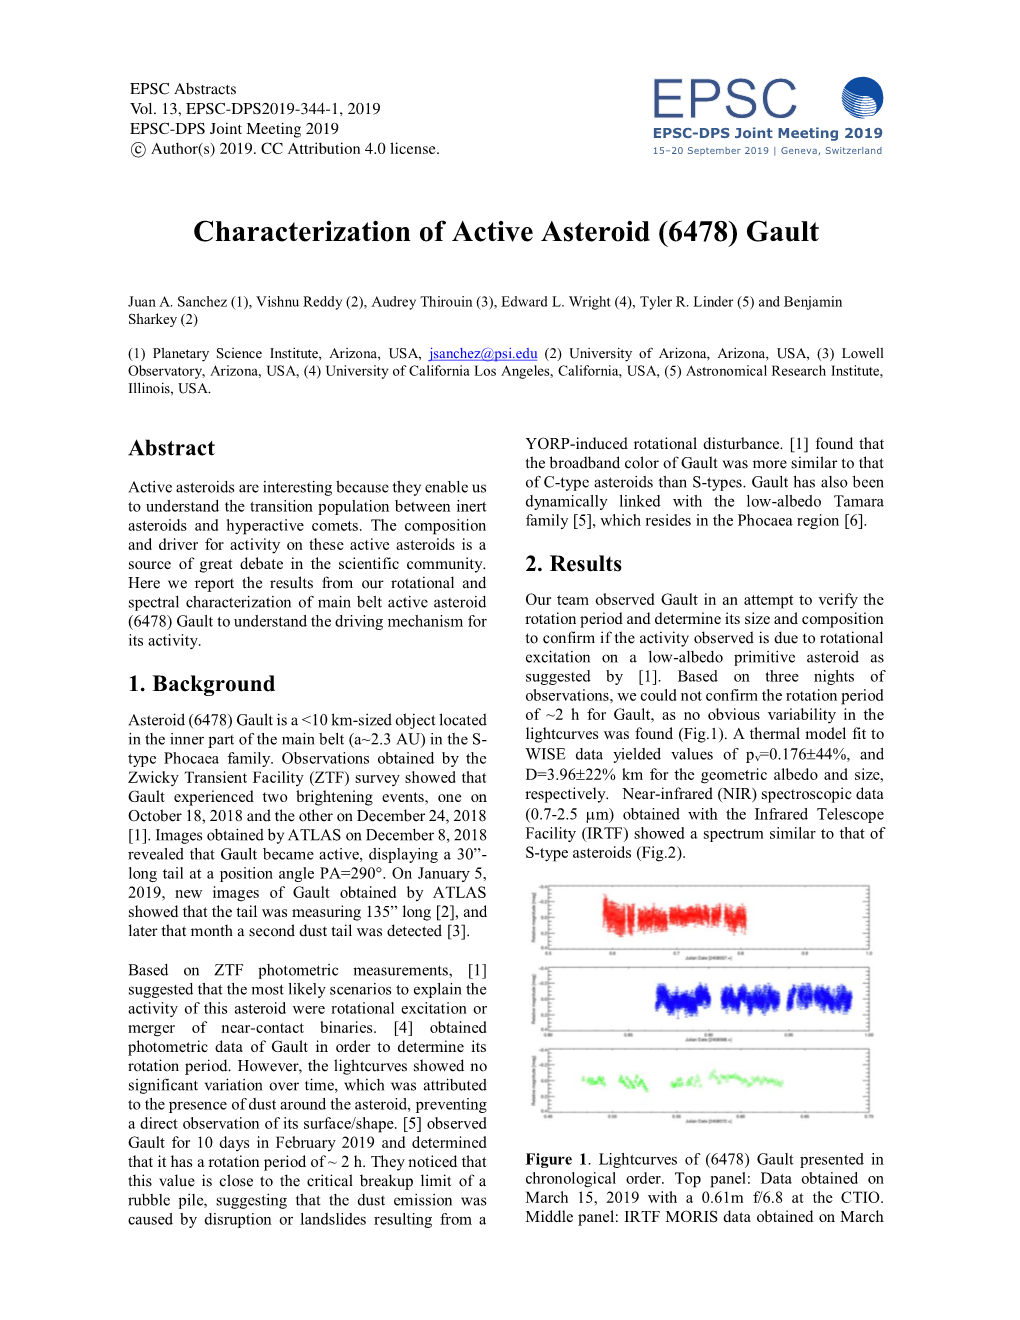 Characterization of Active Asteroid (6478) Gault